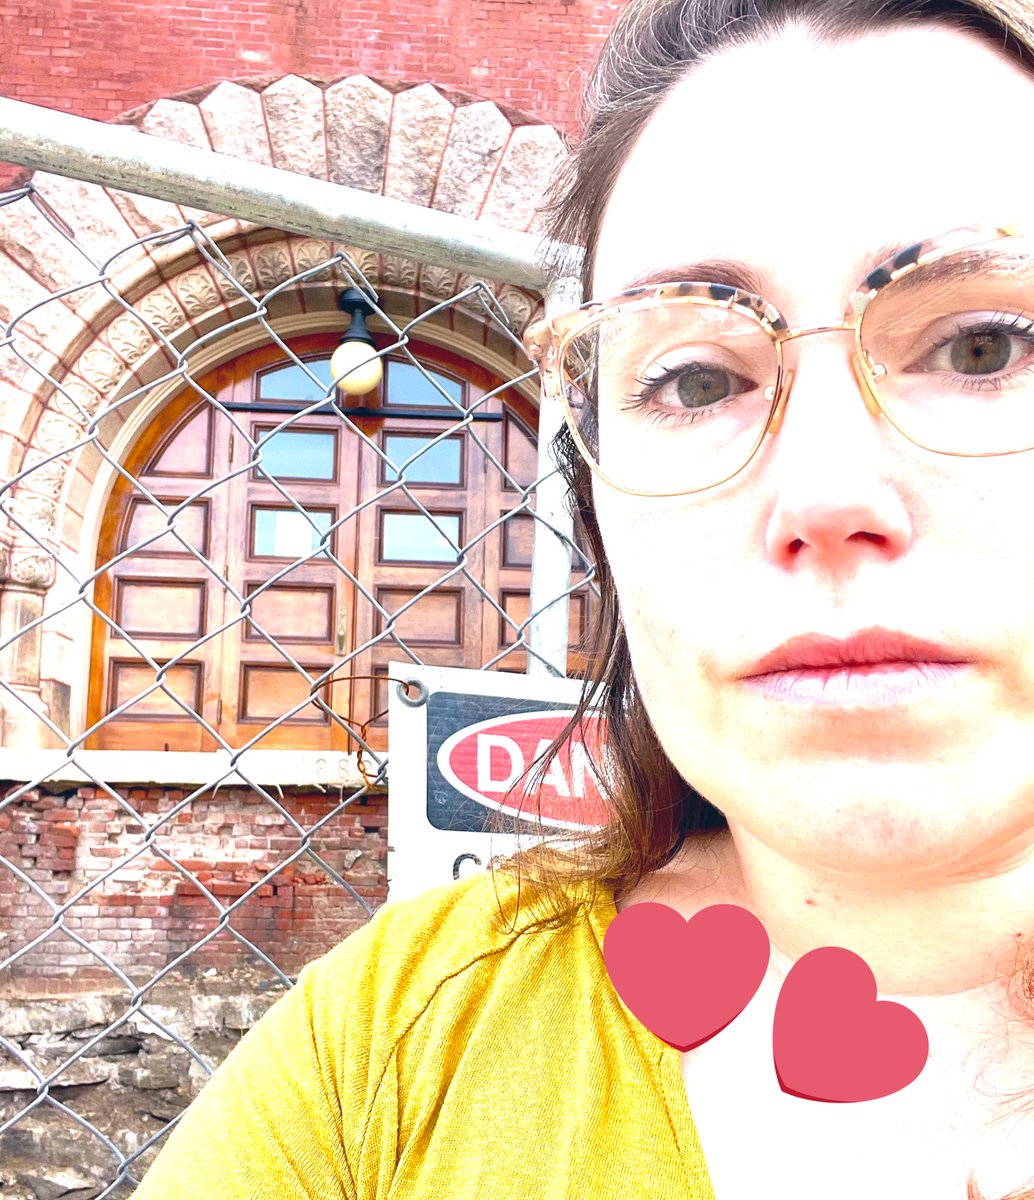 Back on US soil just in time for #CityHallSelfie Day! Please forgive this brick beauty from 1889’s appearance — she is just having a little work done to her facade at the moment #AmherstMA #localgov